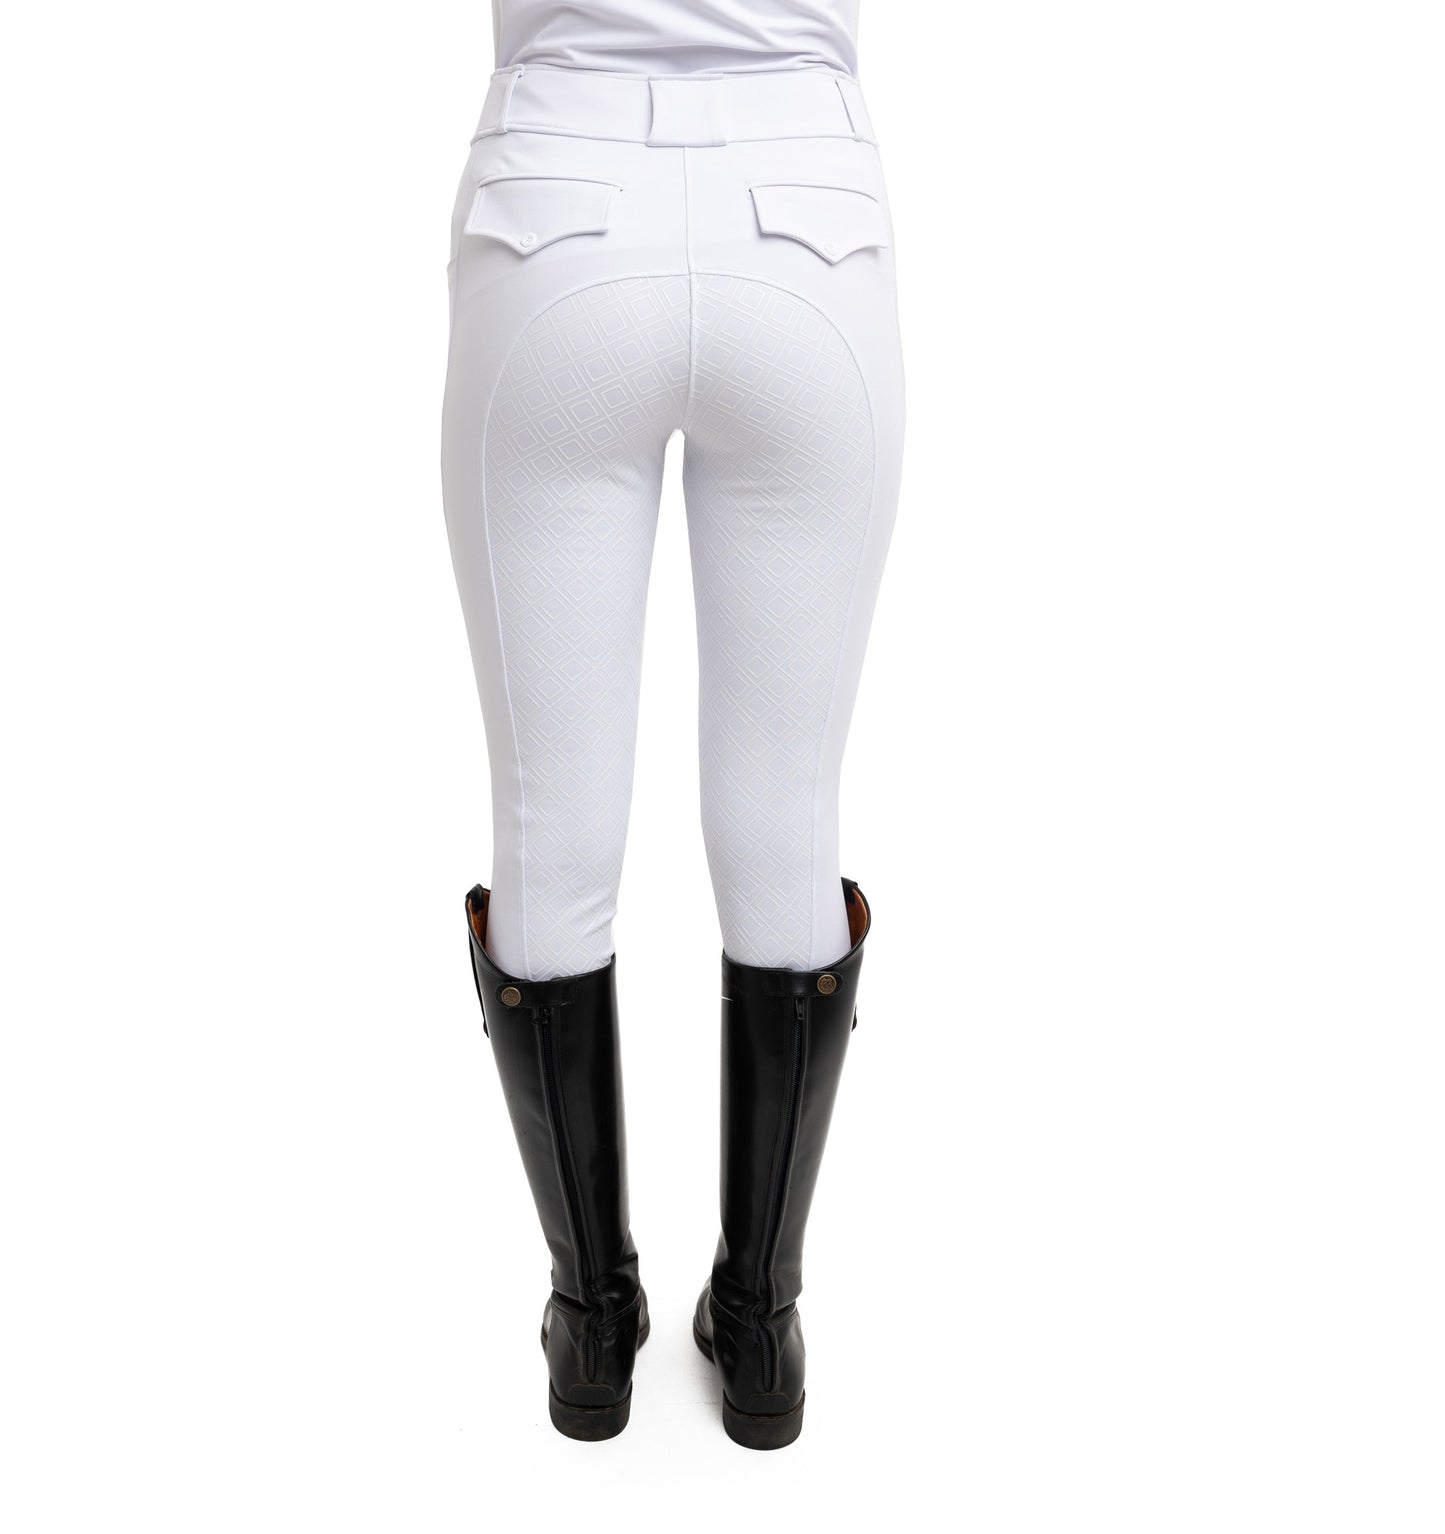 Breeches Competition Horse Riding- Full Seat-White